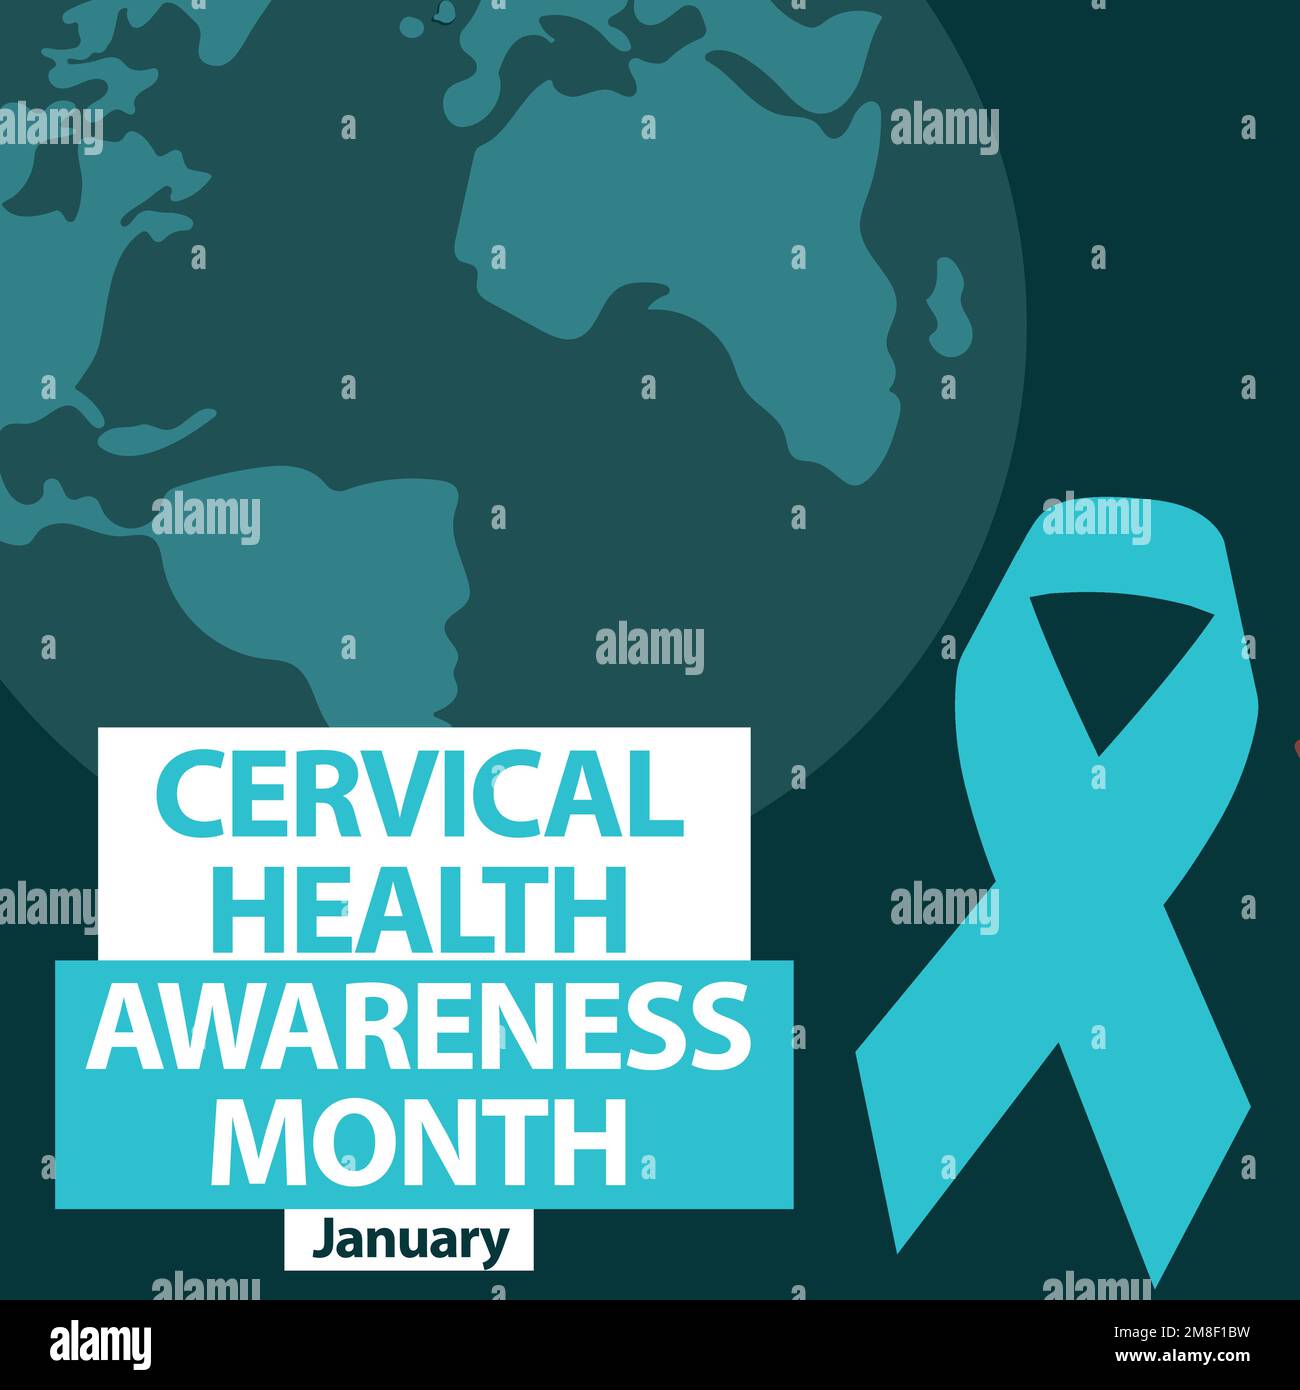 Vector banner design for Cervical Health Awareness Month in January every year. Background design raising awareness about Cervical health month Stock Vector